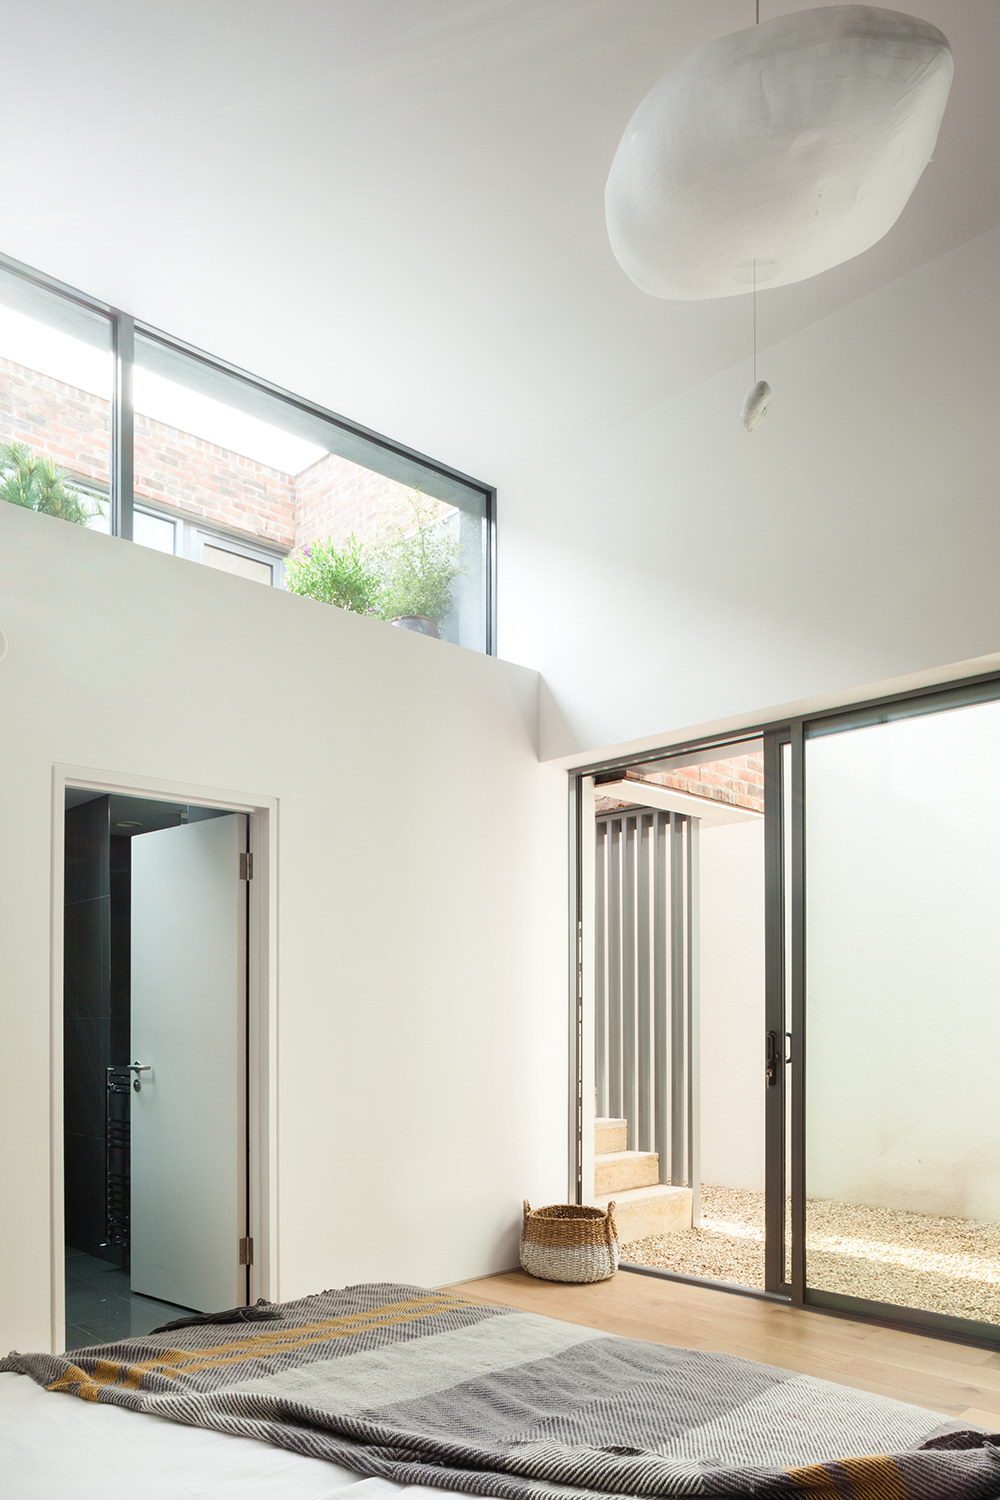 Alma Road – Inconspicuous Brick House by ODOS Architects